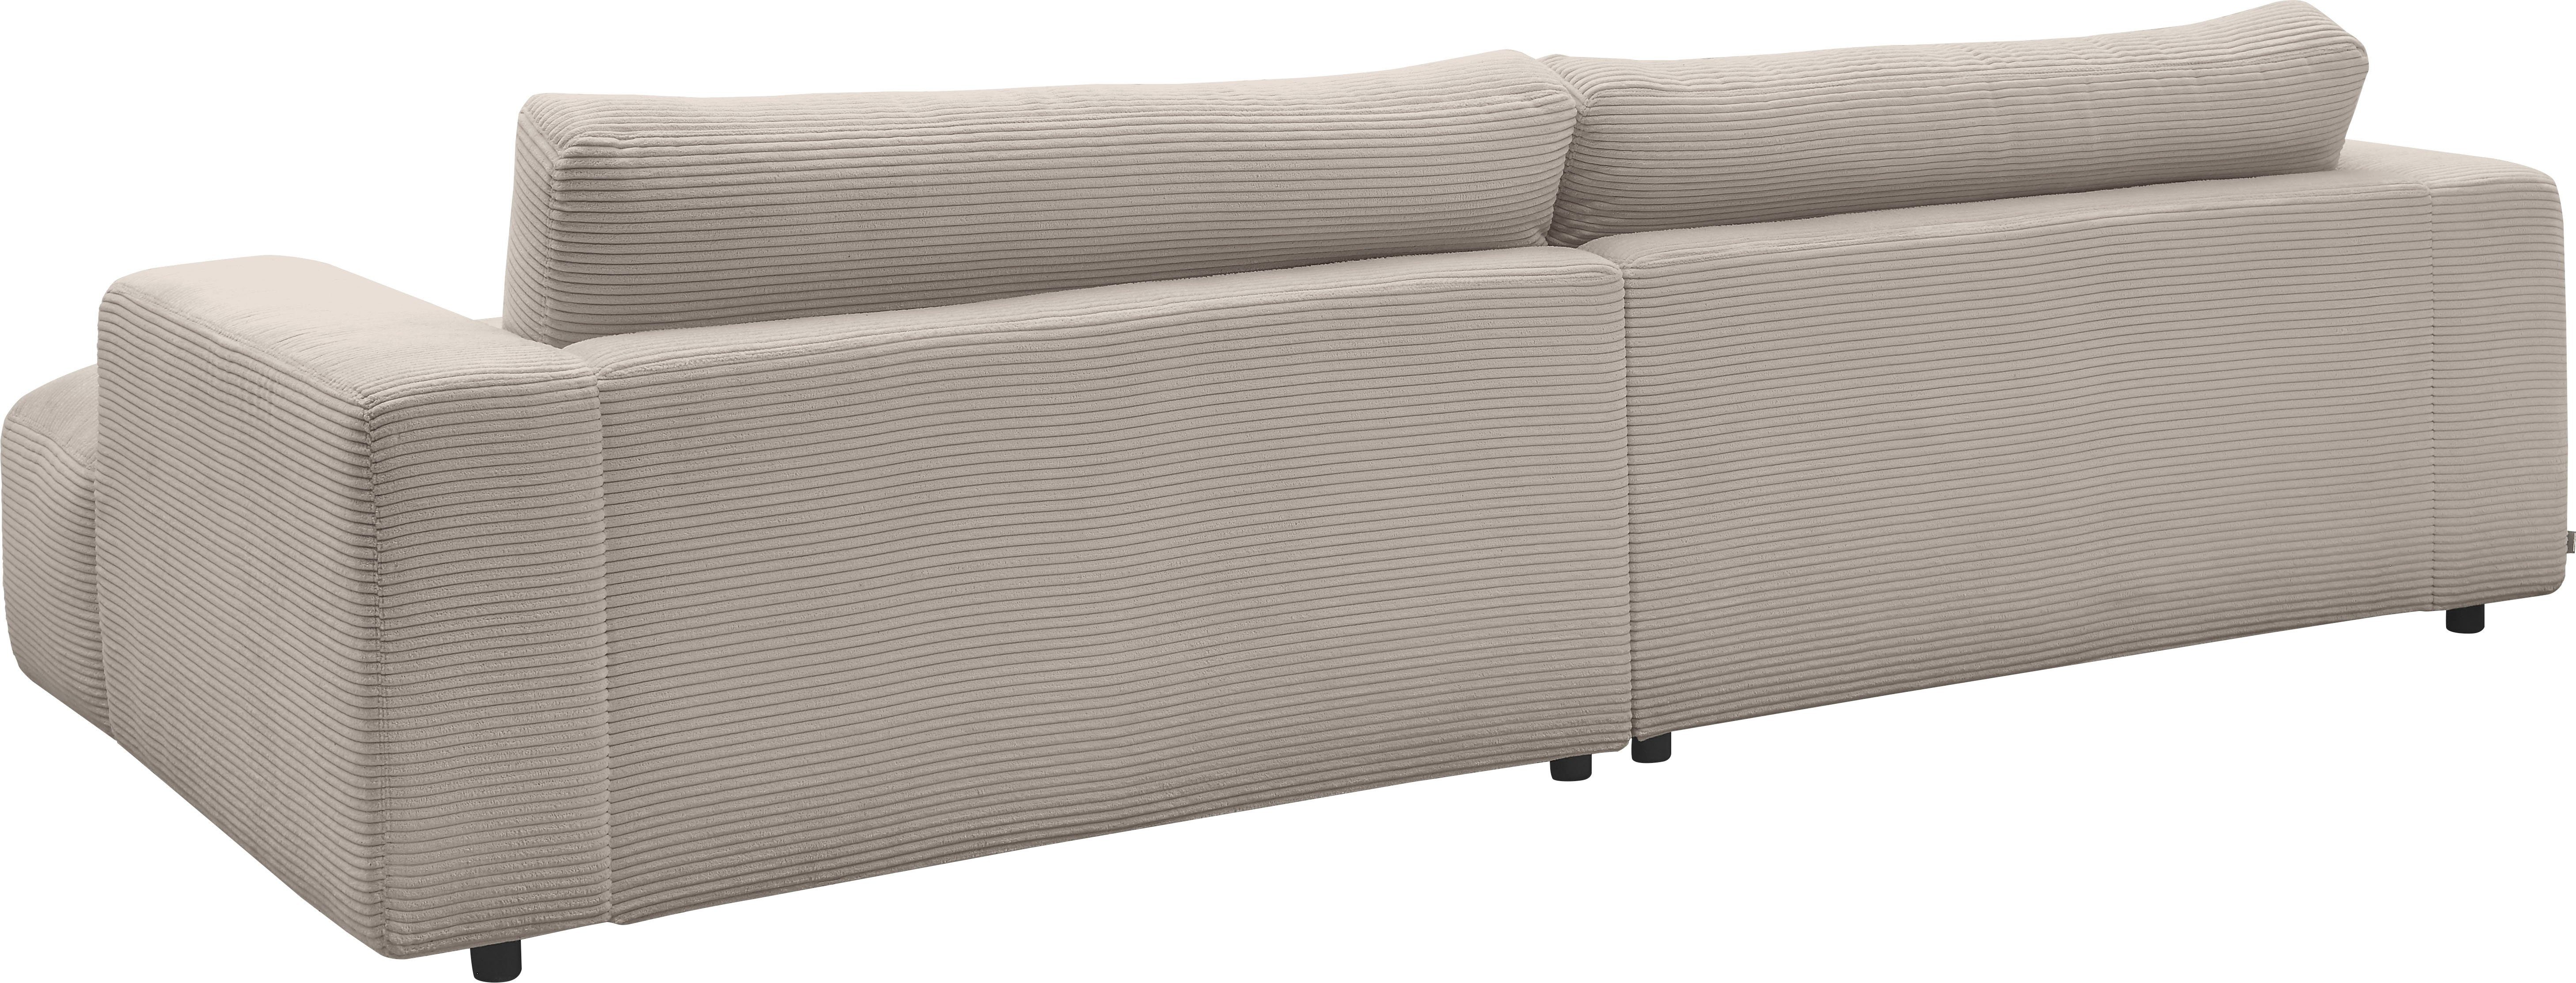 M Loungesofa branded cm 292 Lucia, GALLERY Cord-Bezug, light-grey Breite by Musterring